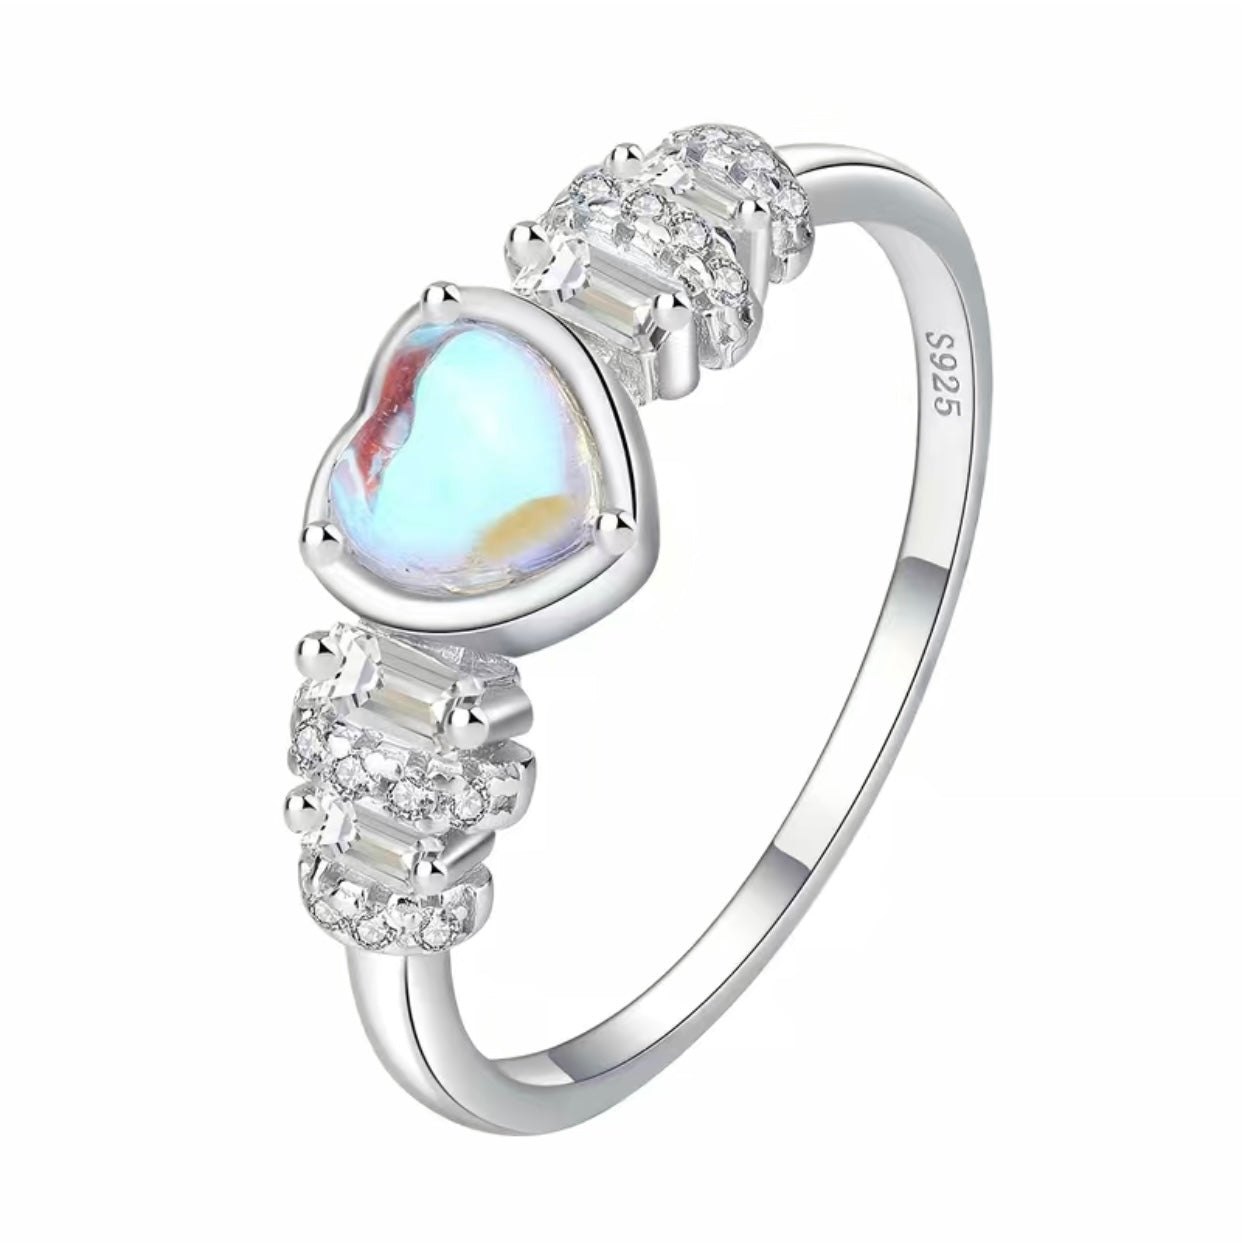 Moonstone Harlow Ring With Cubic Zirconias Sterling Silver